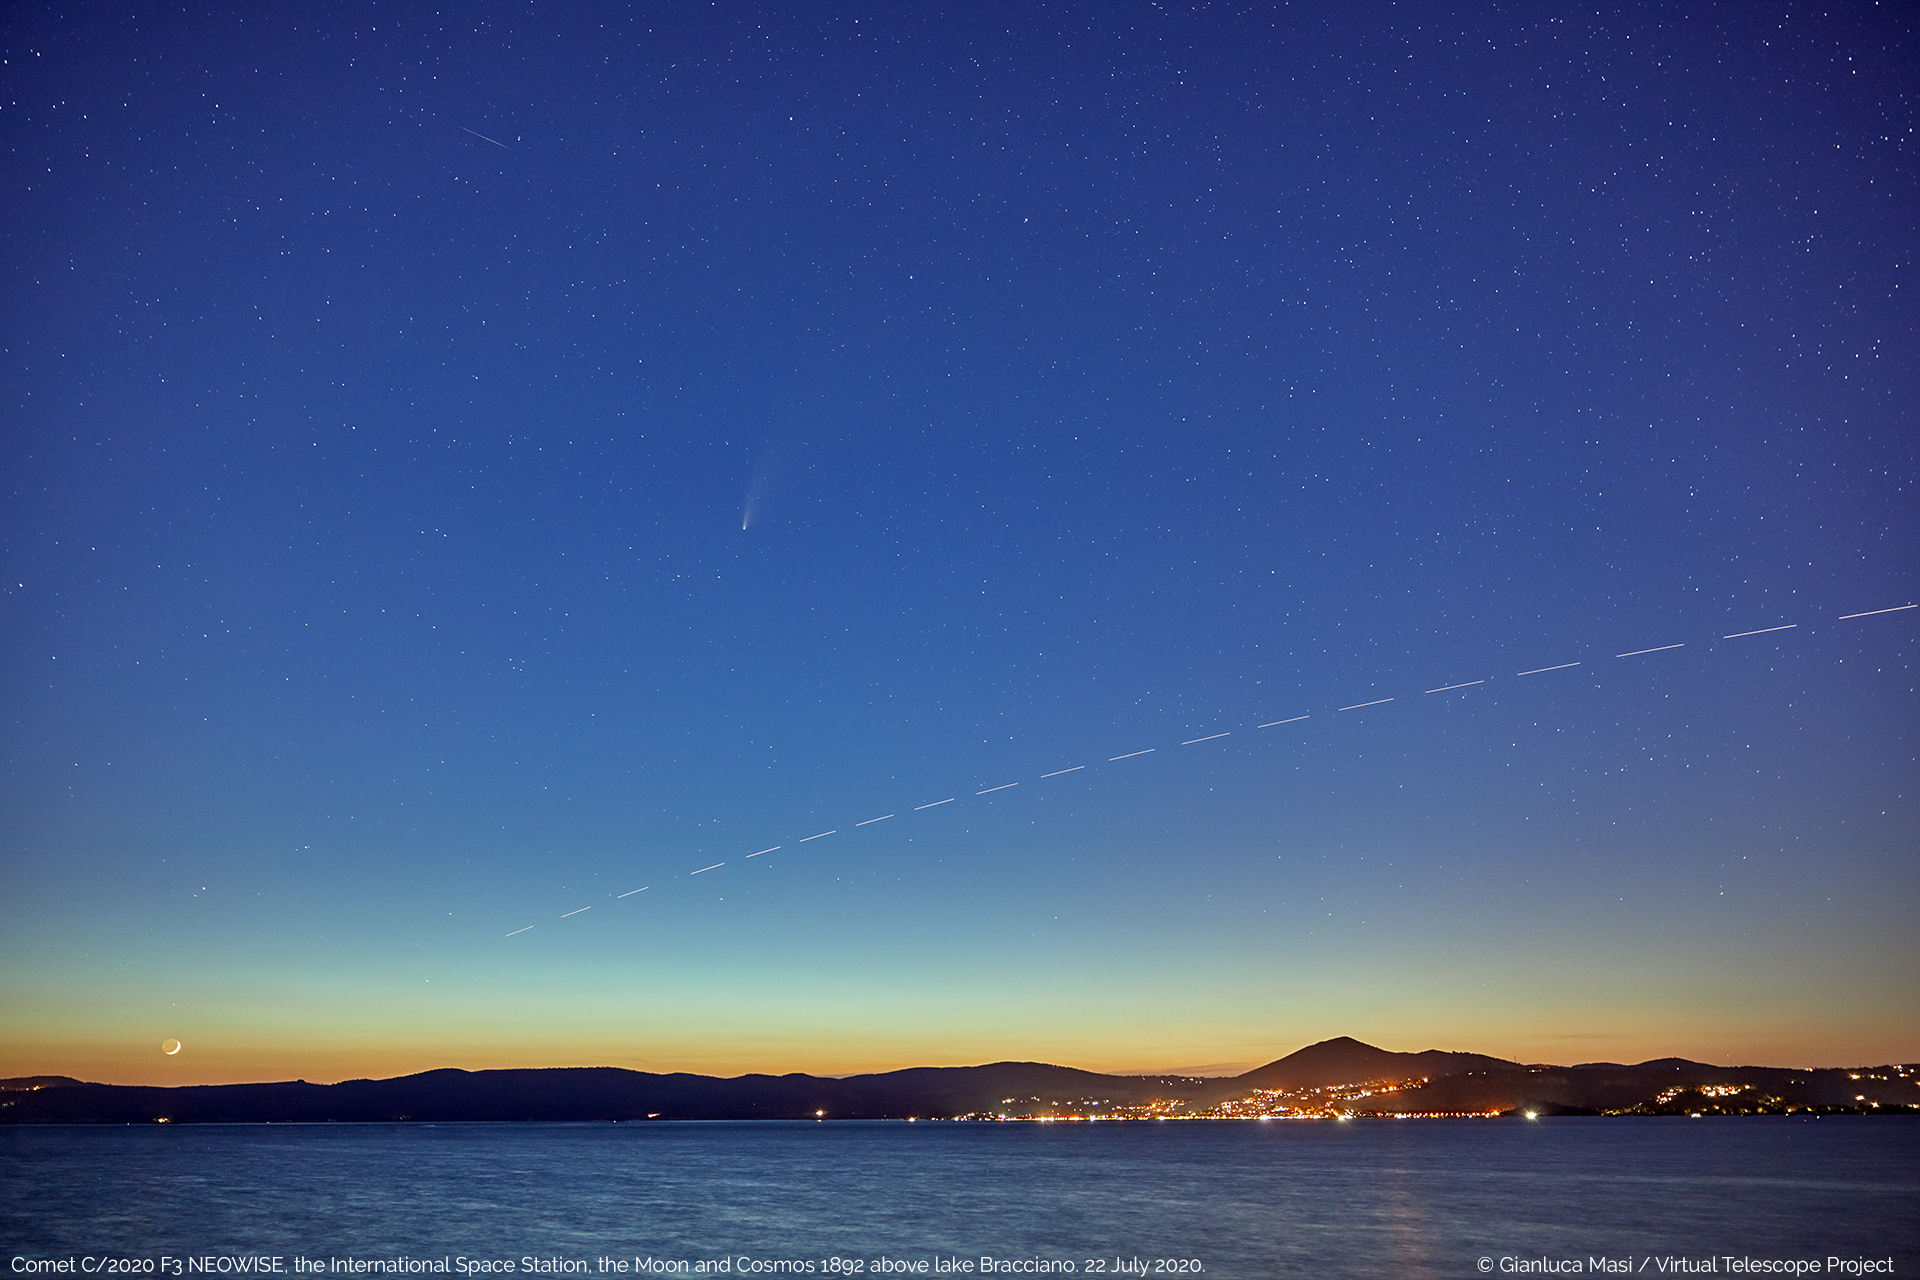 Comet C/2020 F3 NEOWISE at sunset, above the lake Bracciano, Italy, with a very young Moon and the International Space Station crossing the field of view, as well as satellite Cosmos 1892 - 22 July 2020.